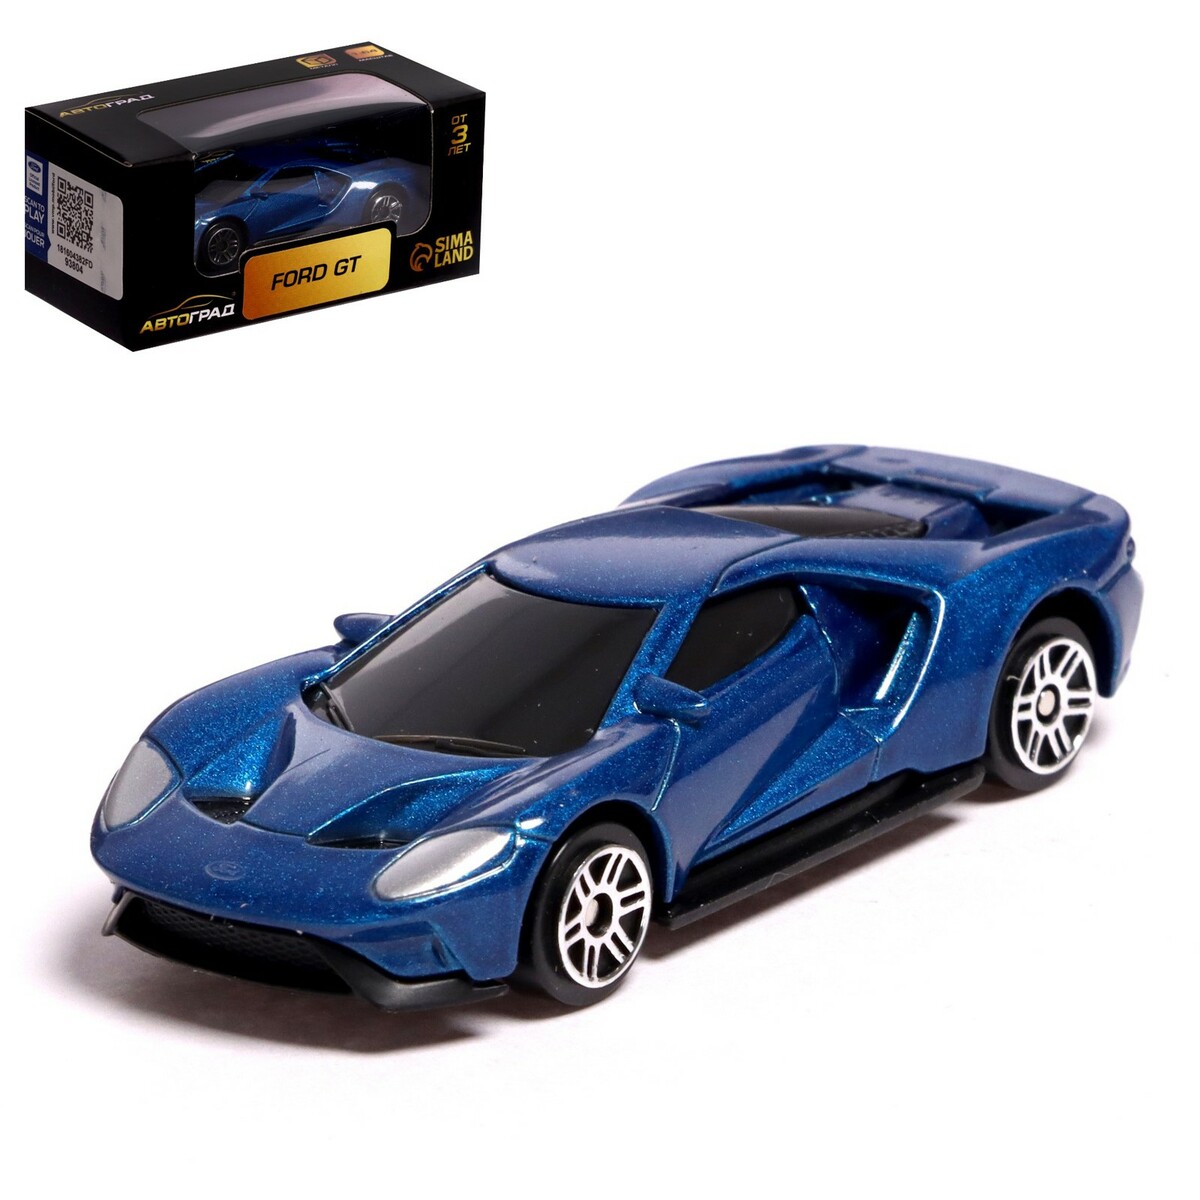   ford gt, 1:64,  